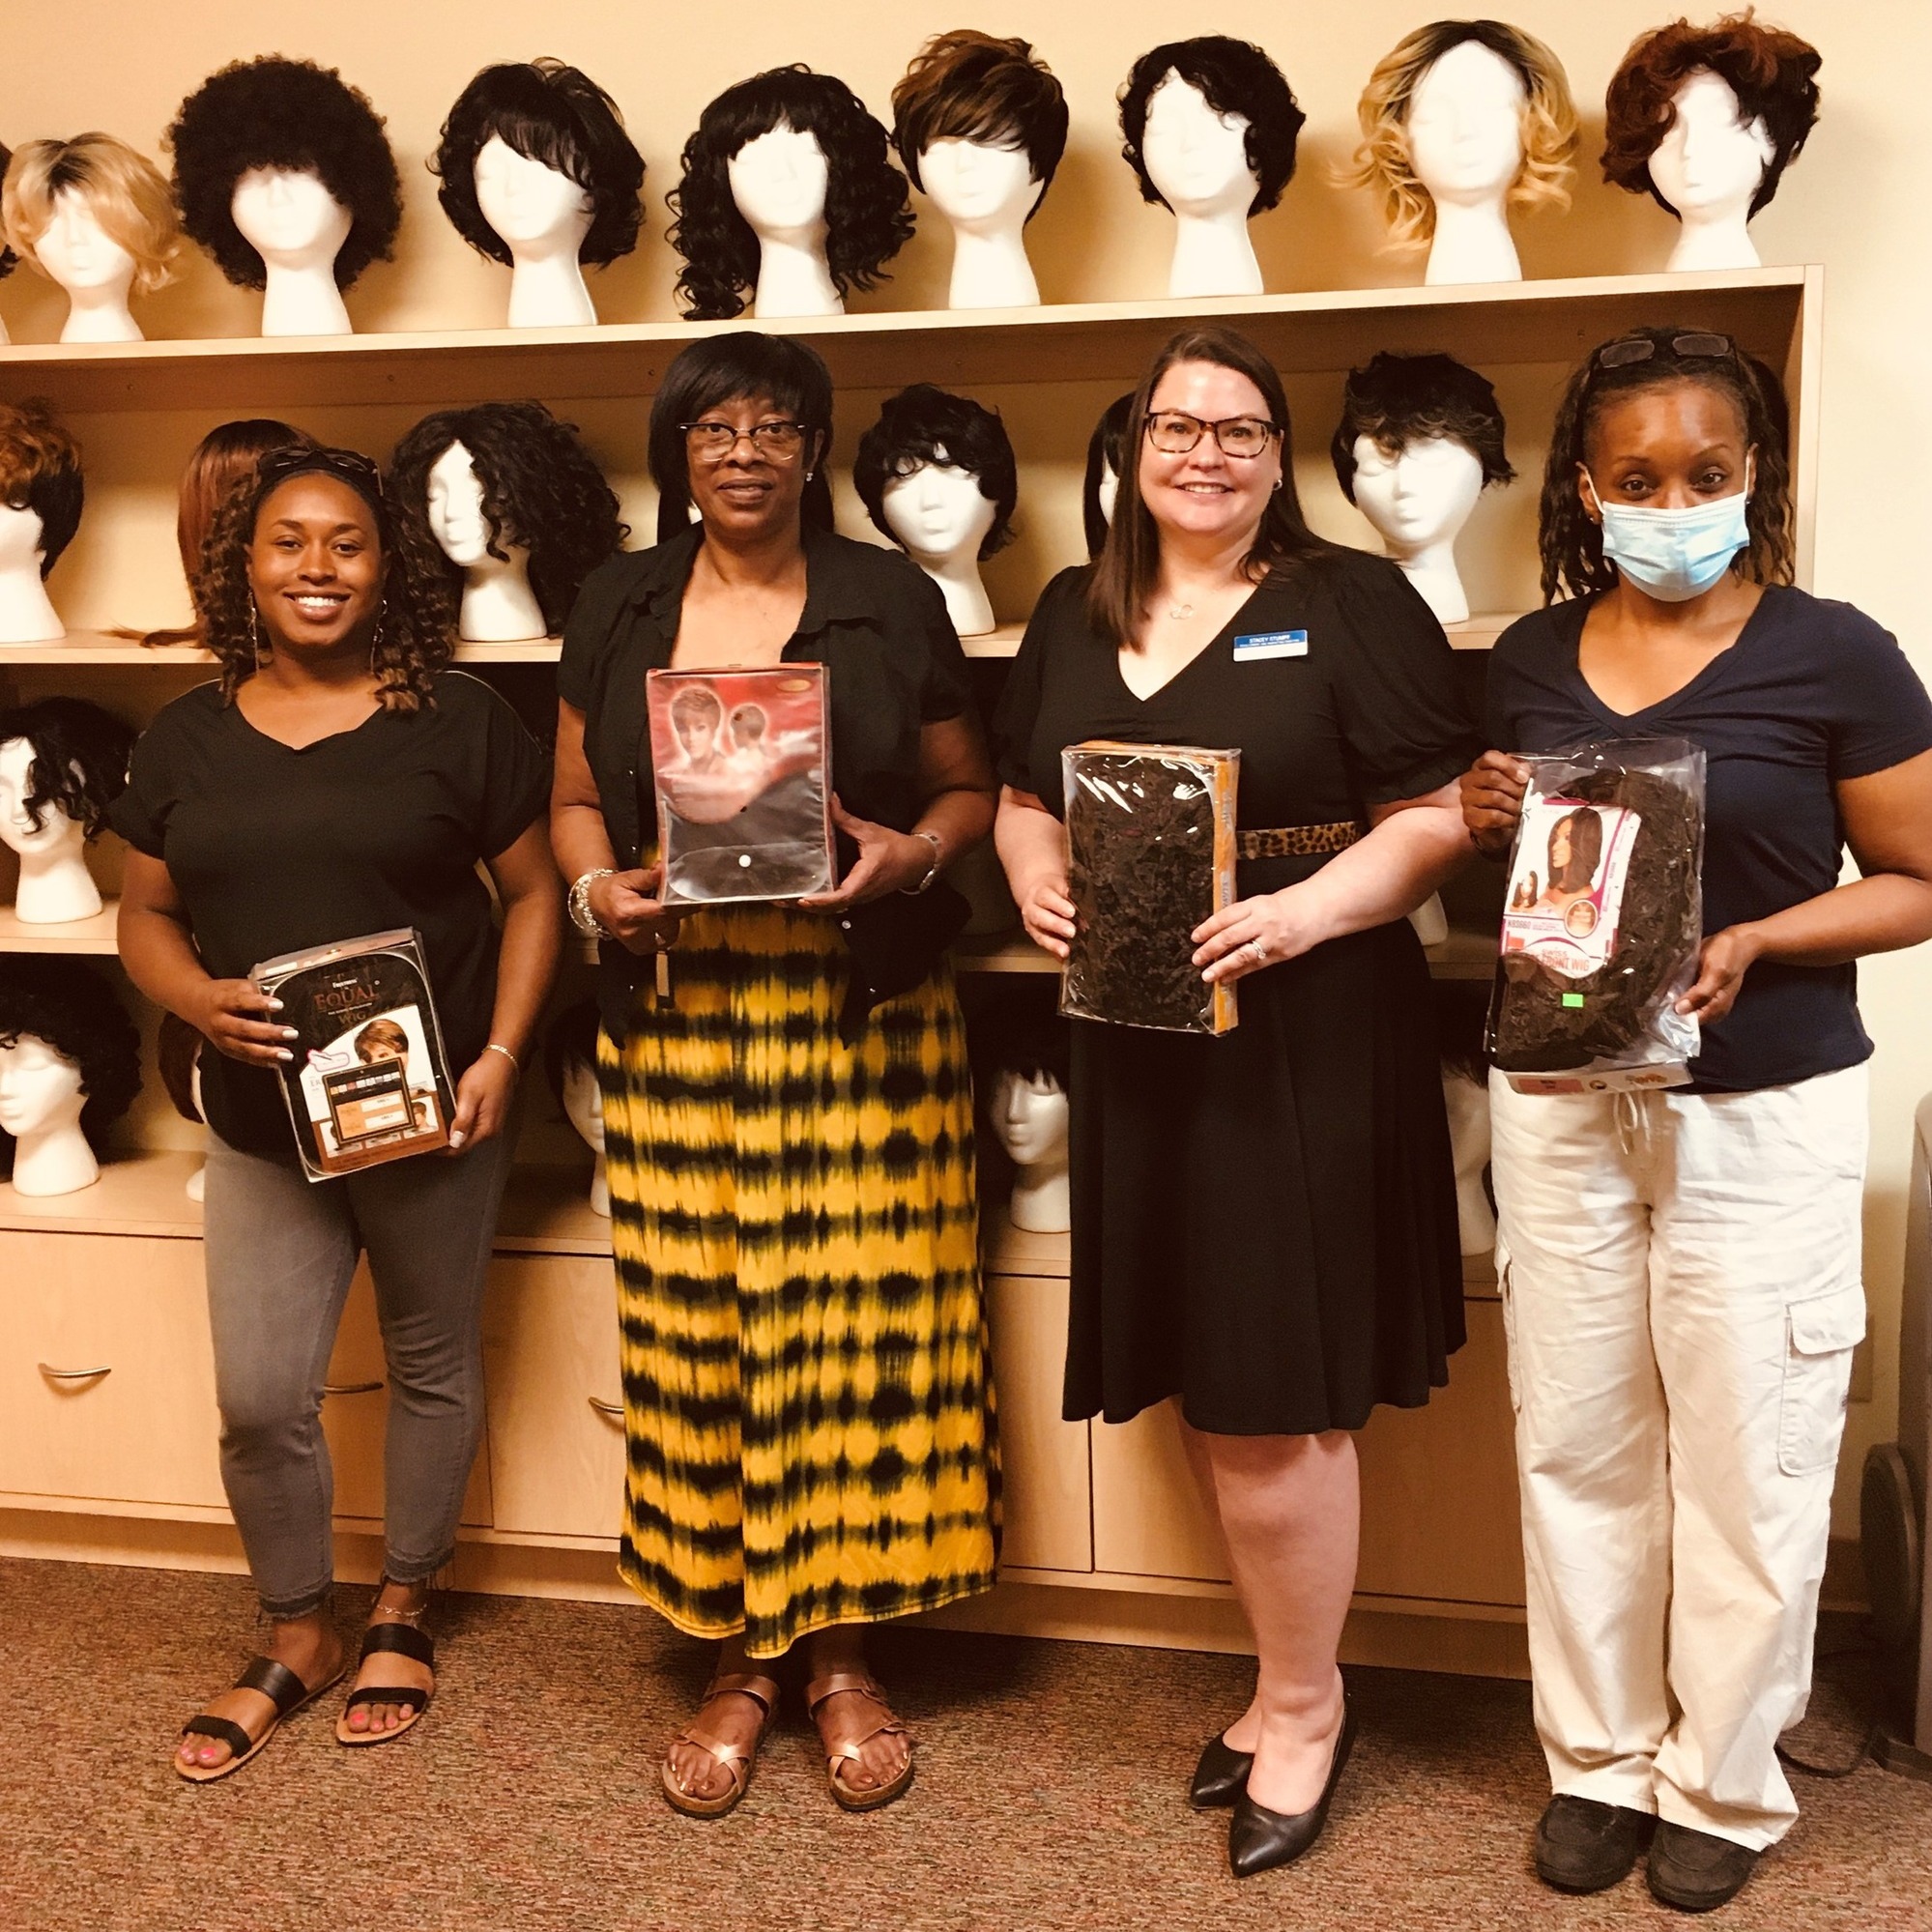 Cancer Services of Northeast Indiana Wig Donations